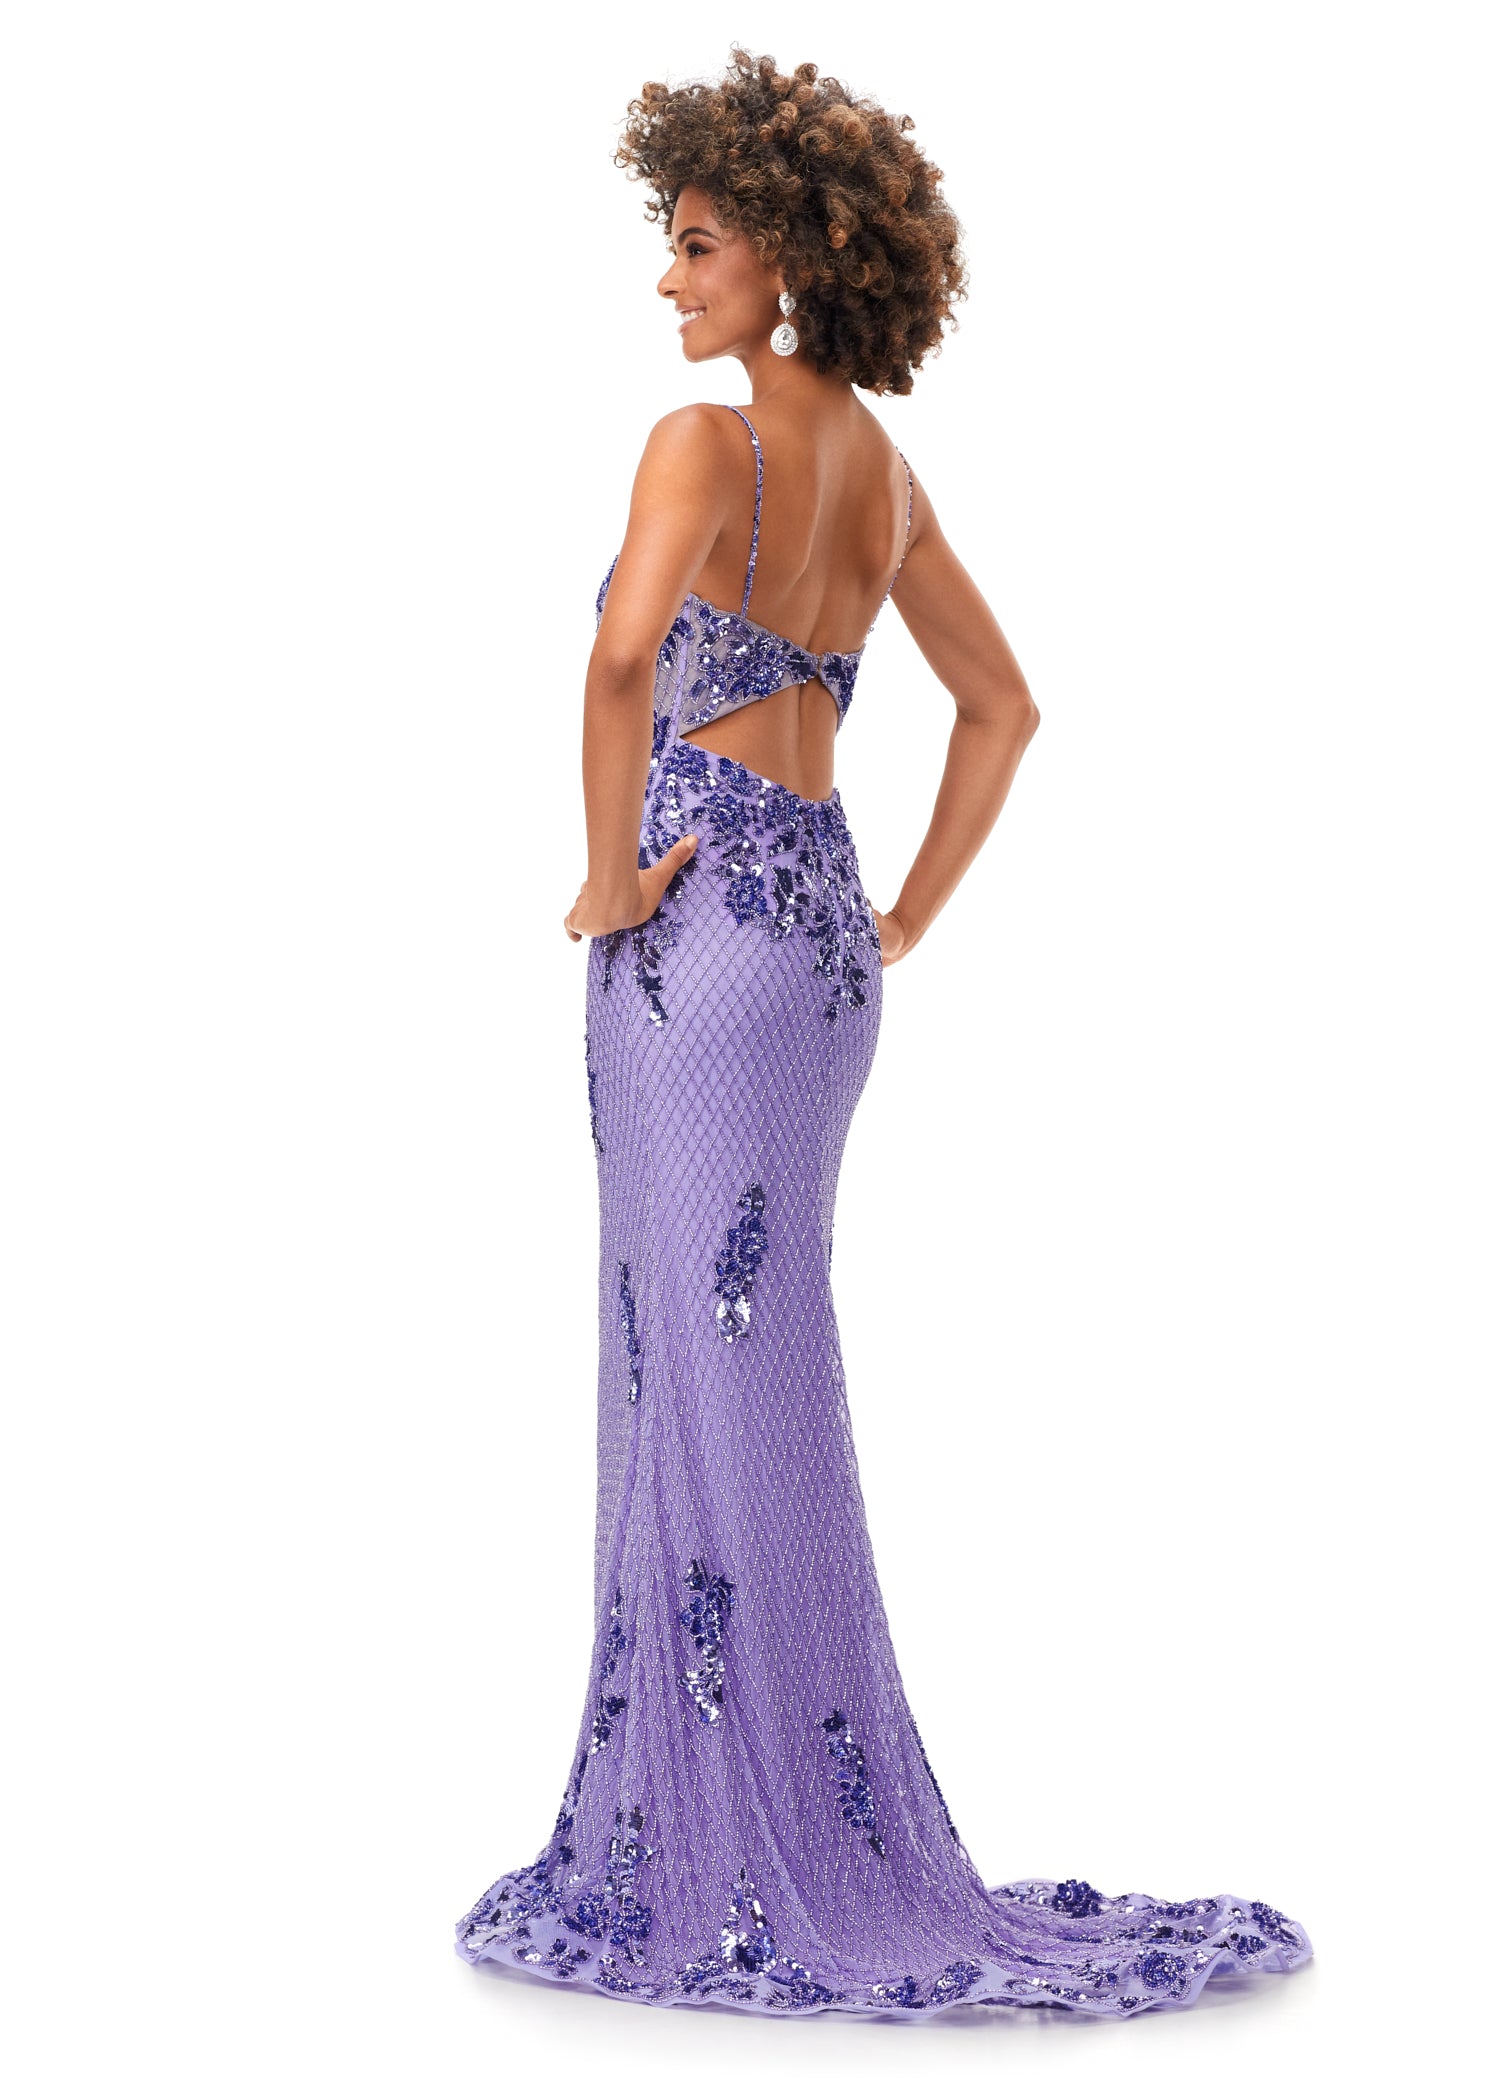 Ashley Lauren 11362 Fully Beaded Spaghetti Strap Prom Dress  This spaghetti strap gown features a sweetheart neckline giving way to a sheer illusion bustier. The bustier is embellished with intricate sequin details that cascade down onto the skirt and hemline. The look is complete with a sweep train.